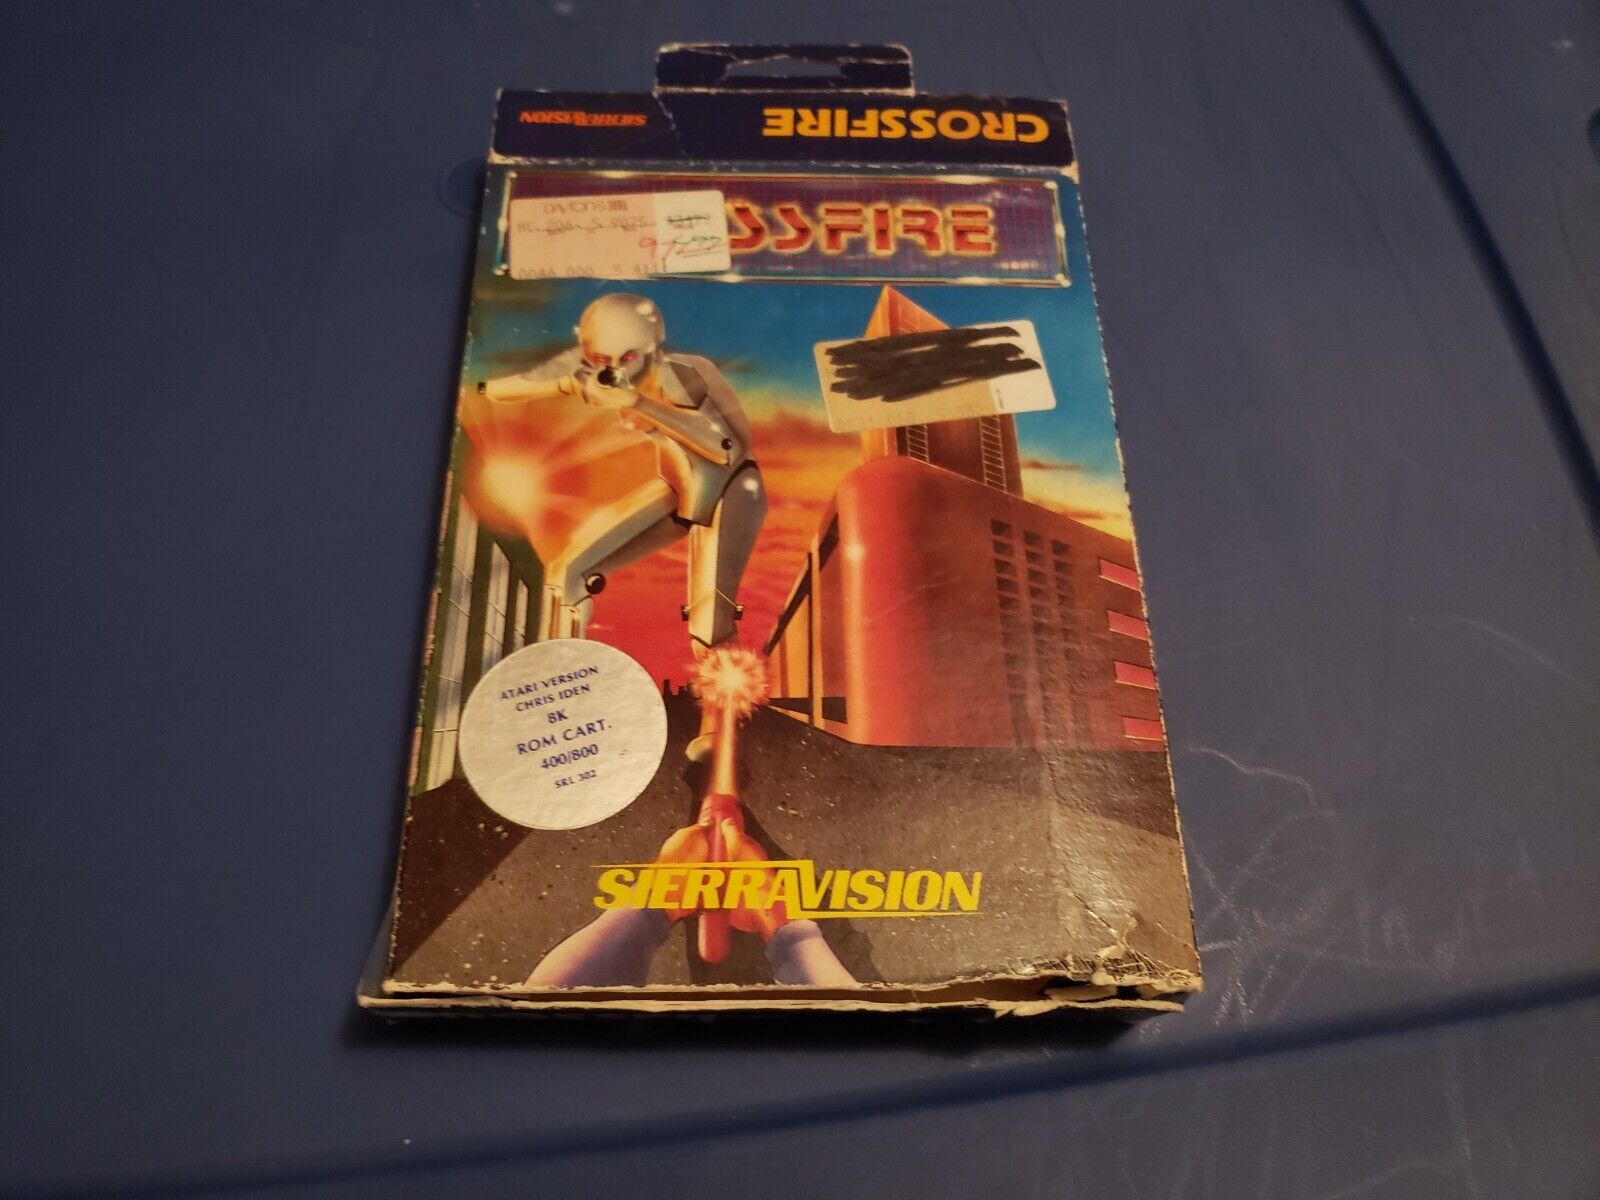 Atari 800 XL XE Crossfire Cartridge Game BOX ONLY by Sierra On-Line NO CART